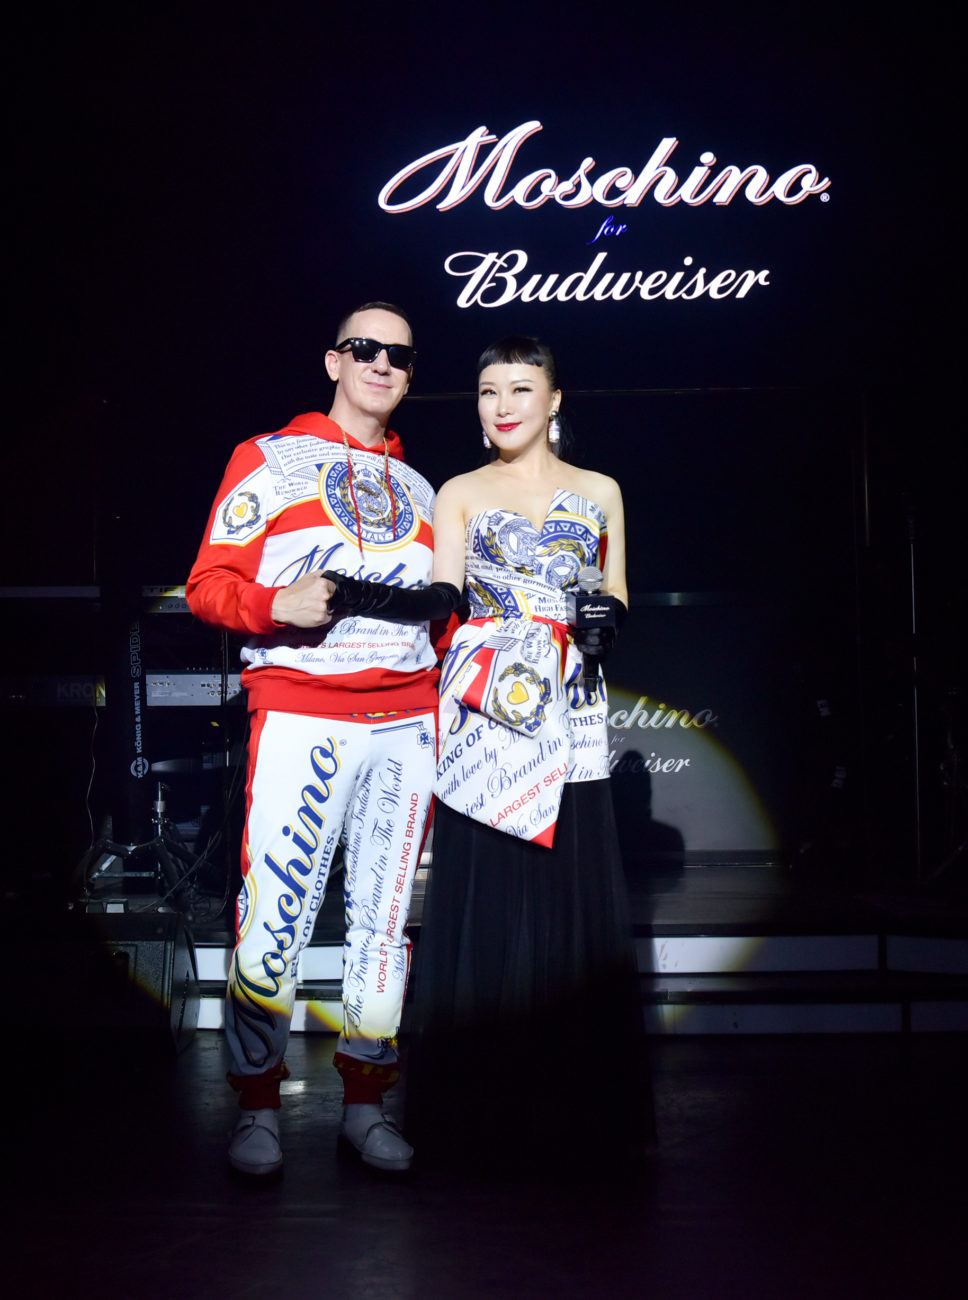 MOSCHINO X BUDWEISER party in Shanghai, Courtesy of Moschino